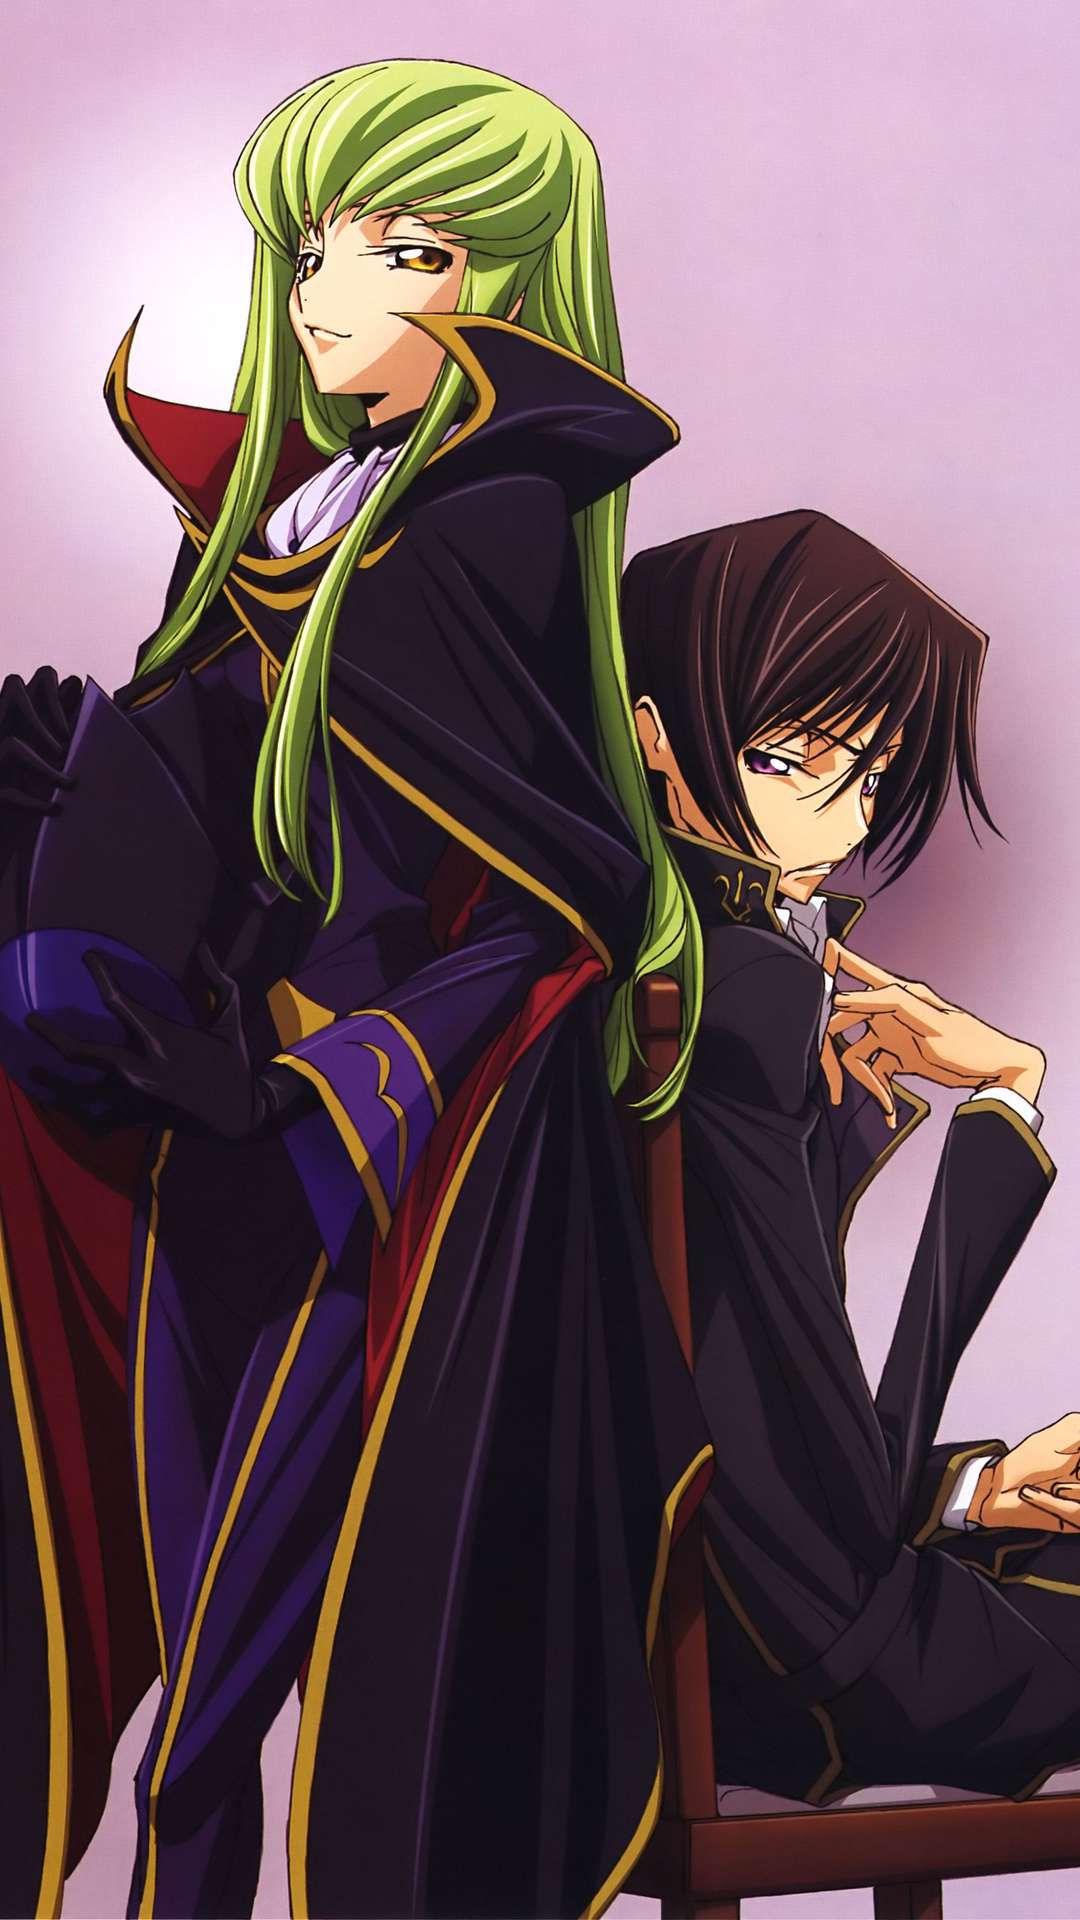 Just some cute CC wallpapers for your phone  rCodeGeass